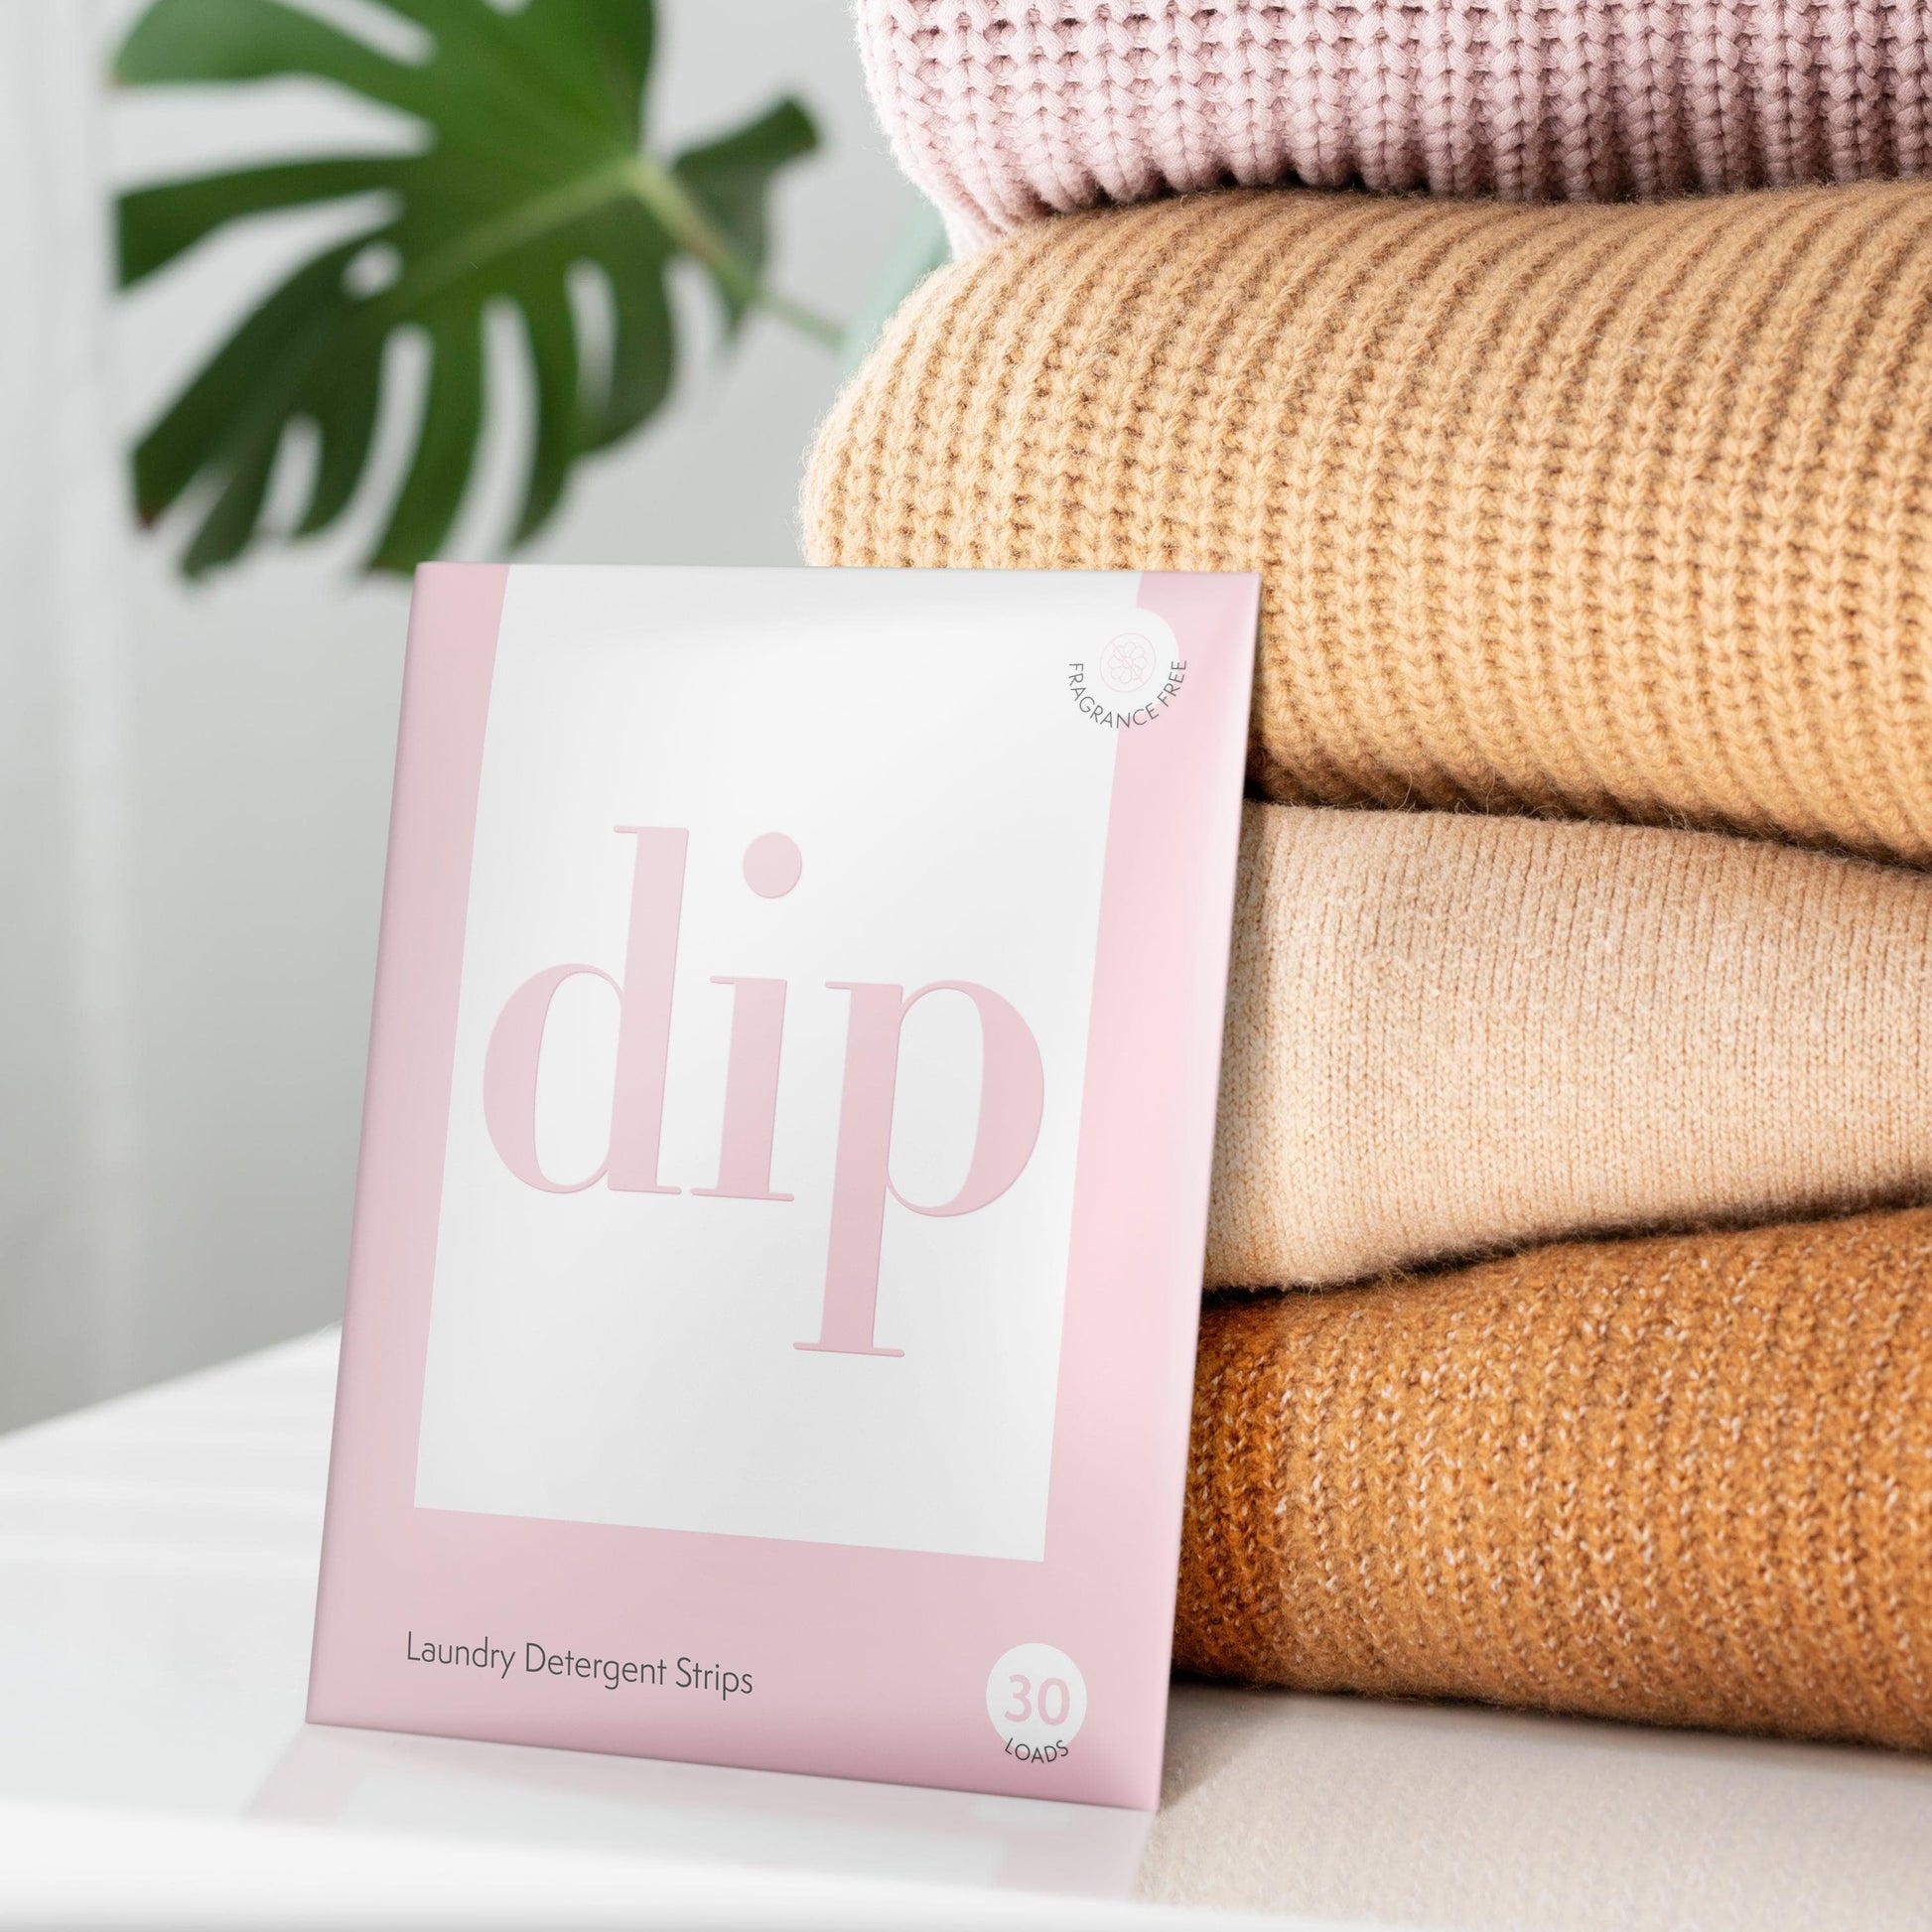 wearedipuk IMAGES - Laundry Detergent Sheets Special Offer